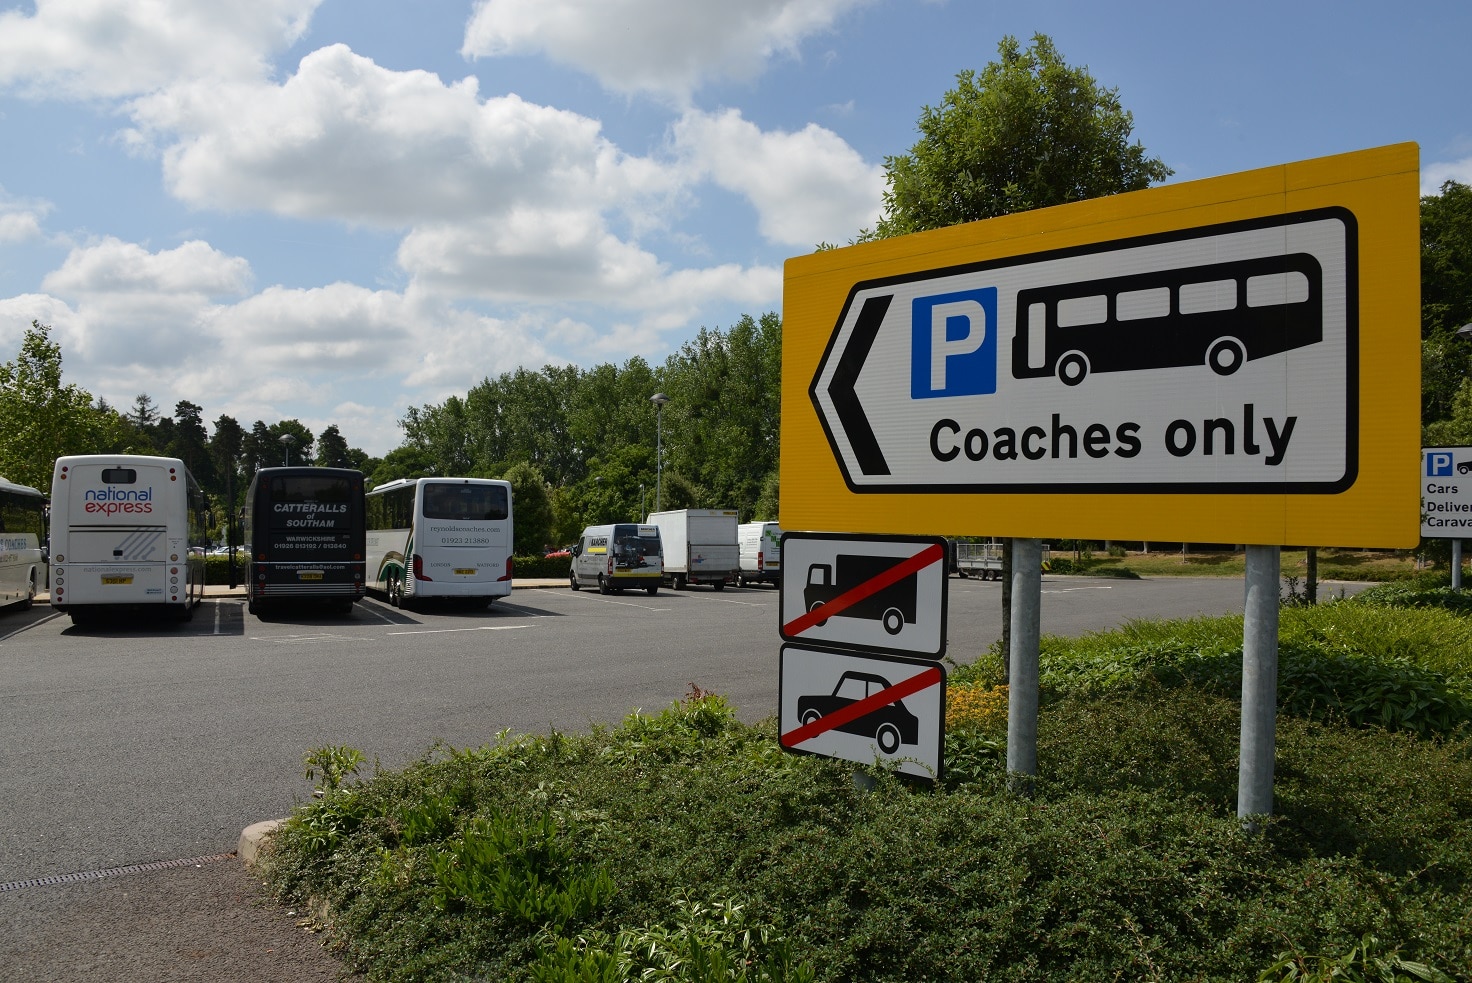 Coach trips guidance defended by minister